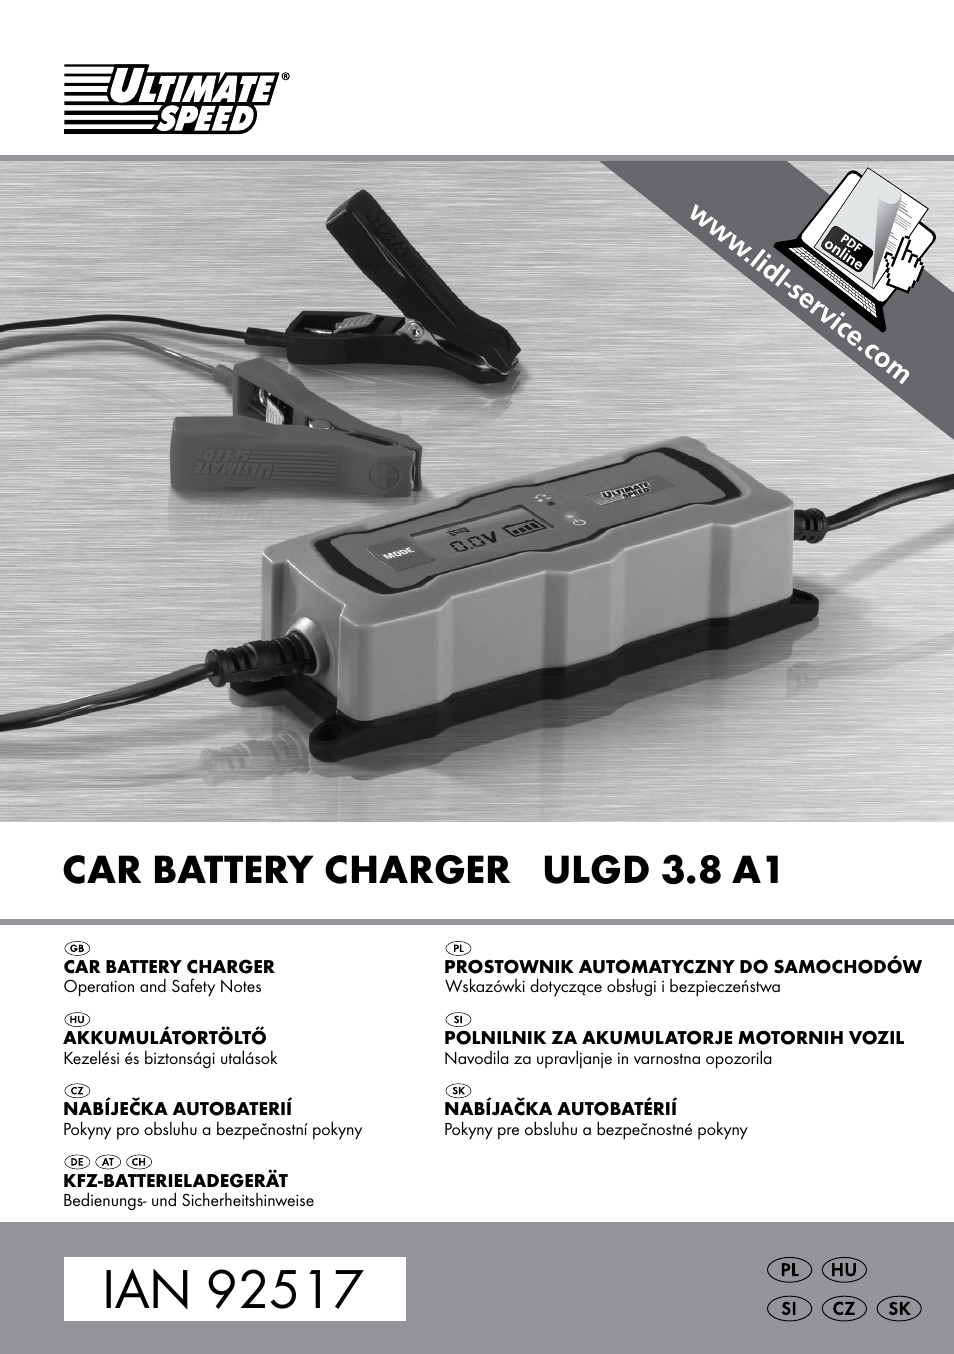 Car Battery Charger Ulgd 3.8 A1 Online - anuariocidob.org 1695888611